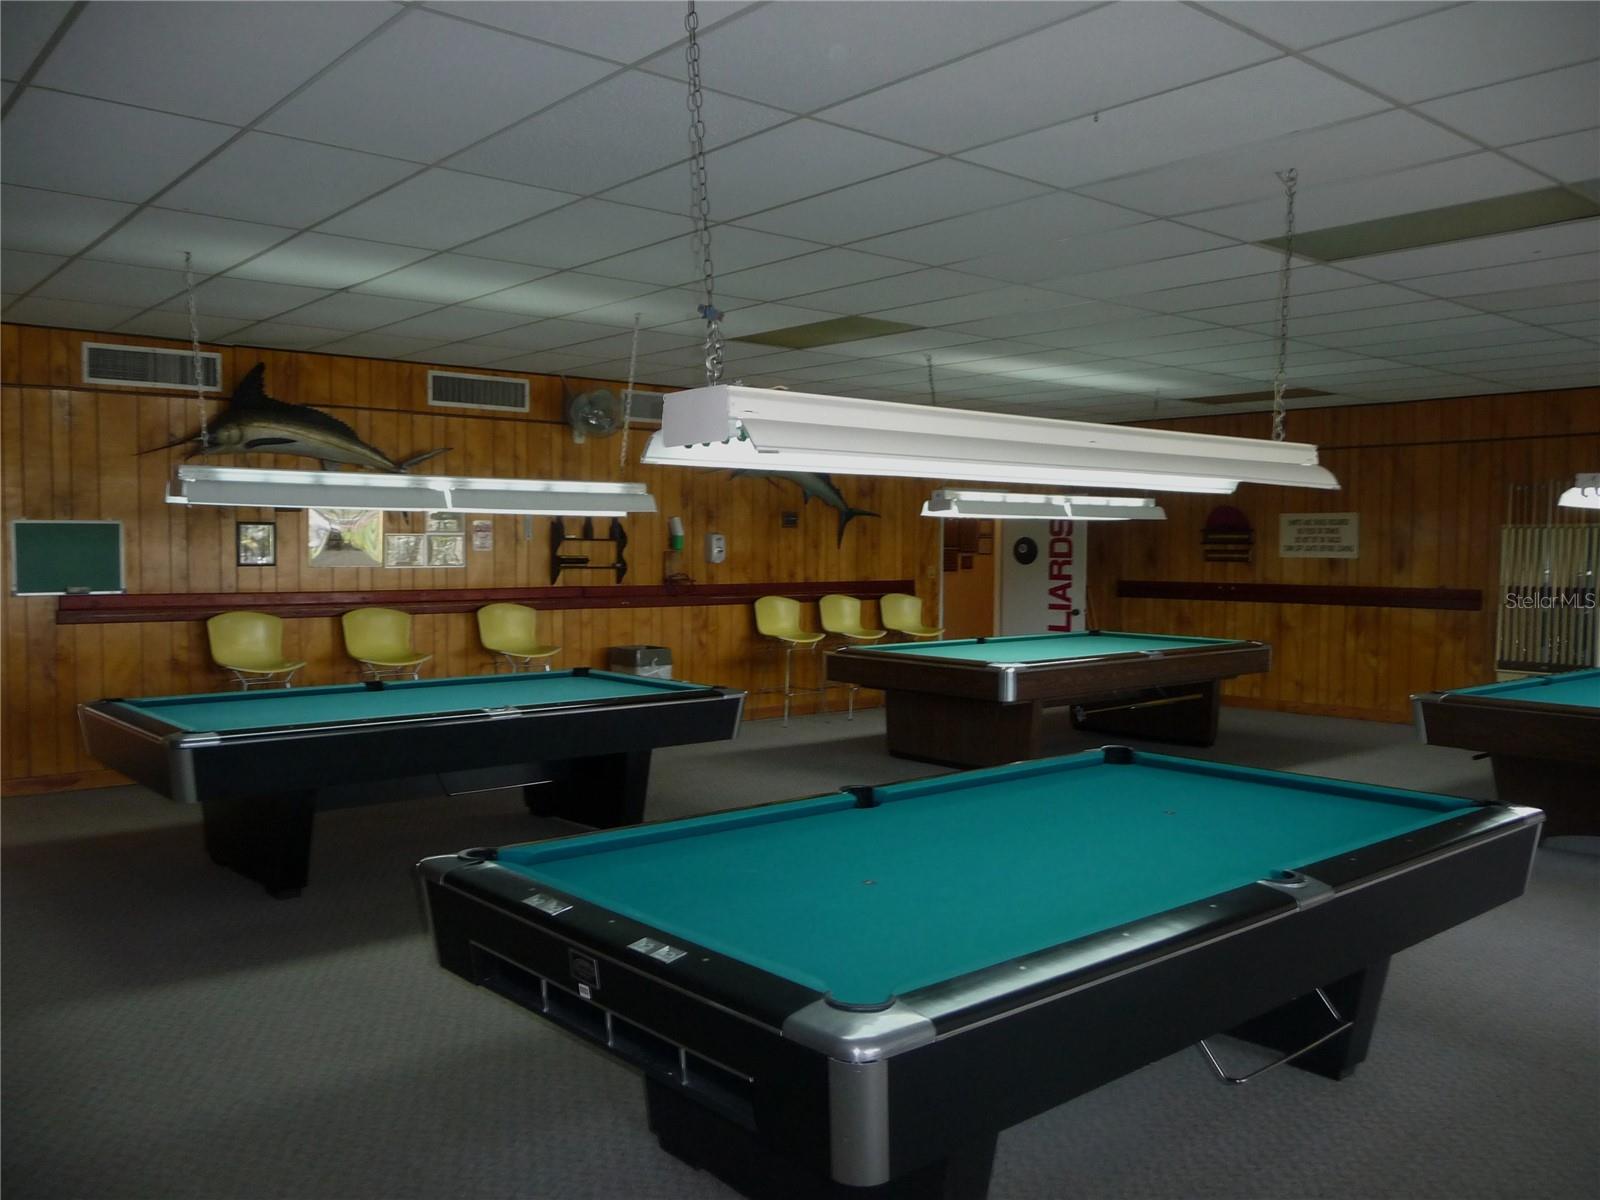 Billiards in the club house.